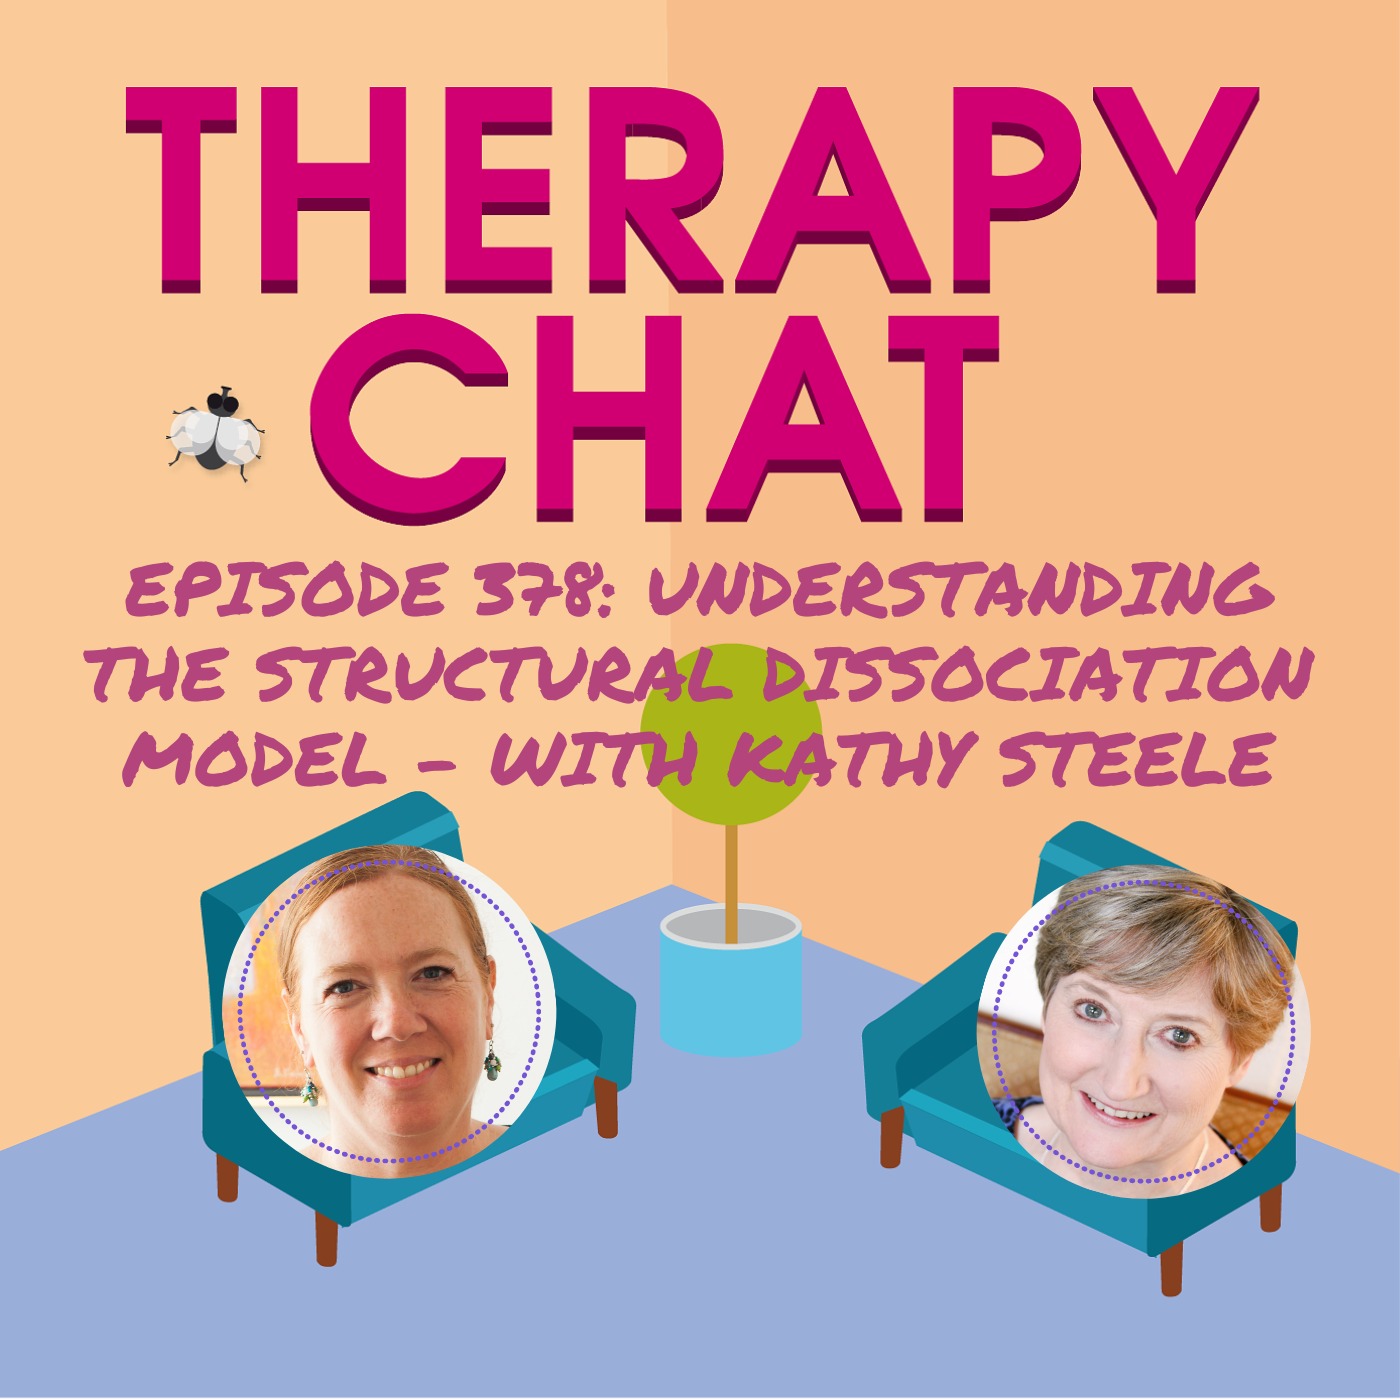 378: Understanding The Structural Dissociation Model - With Kathy Steele